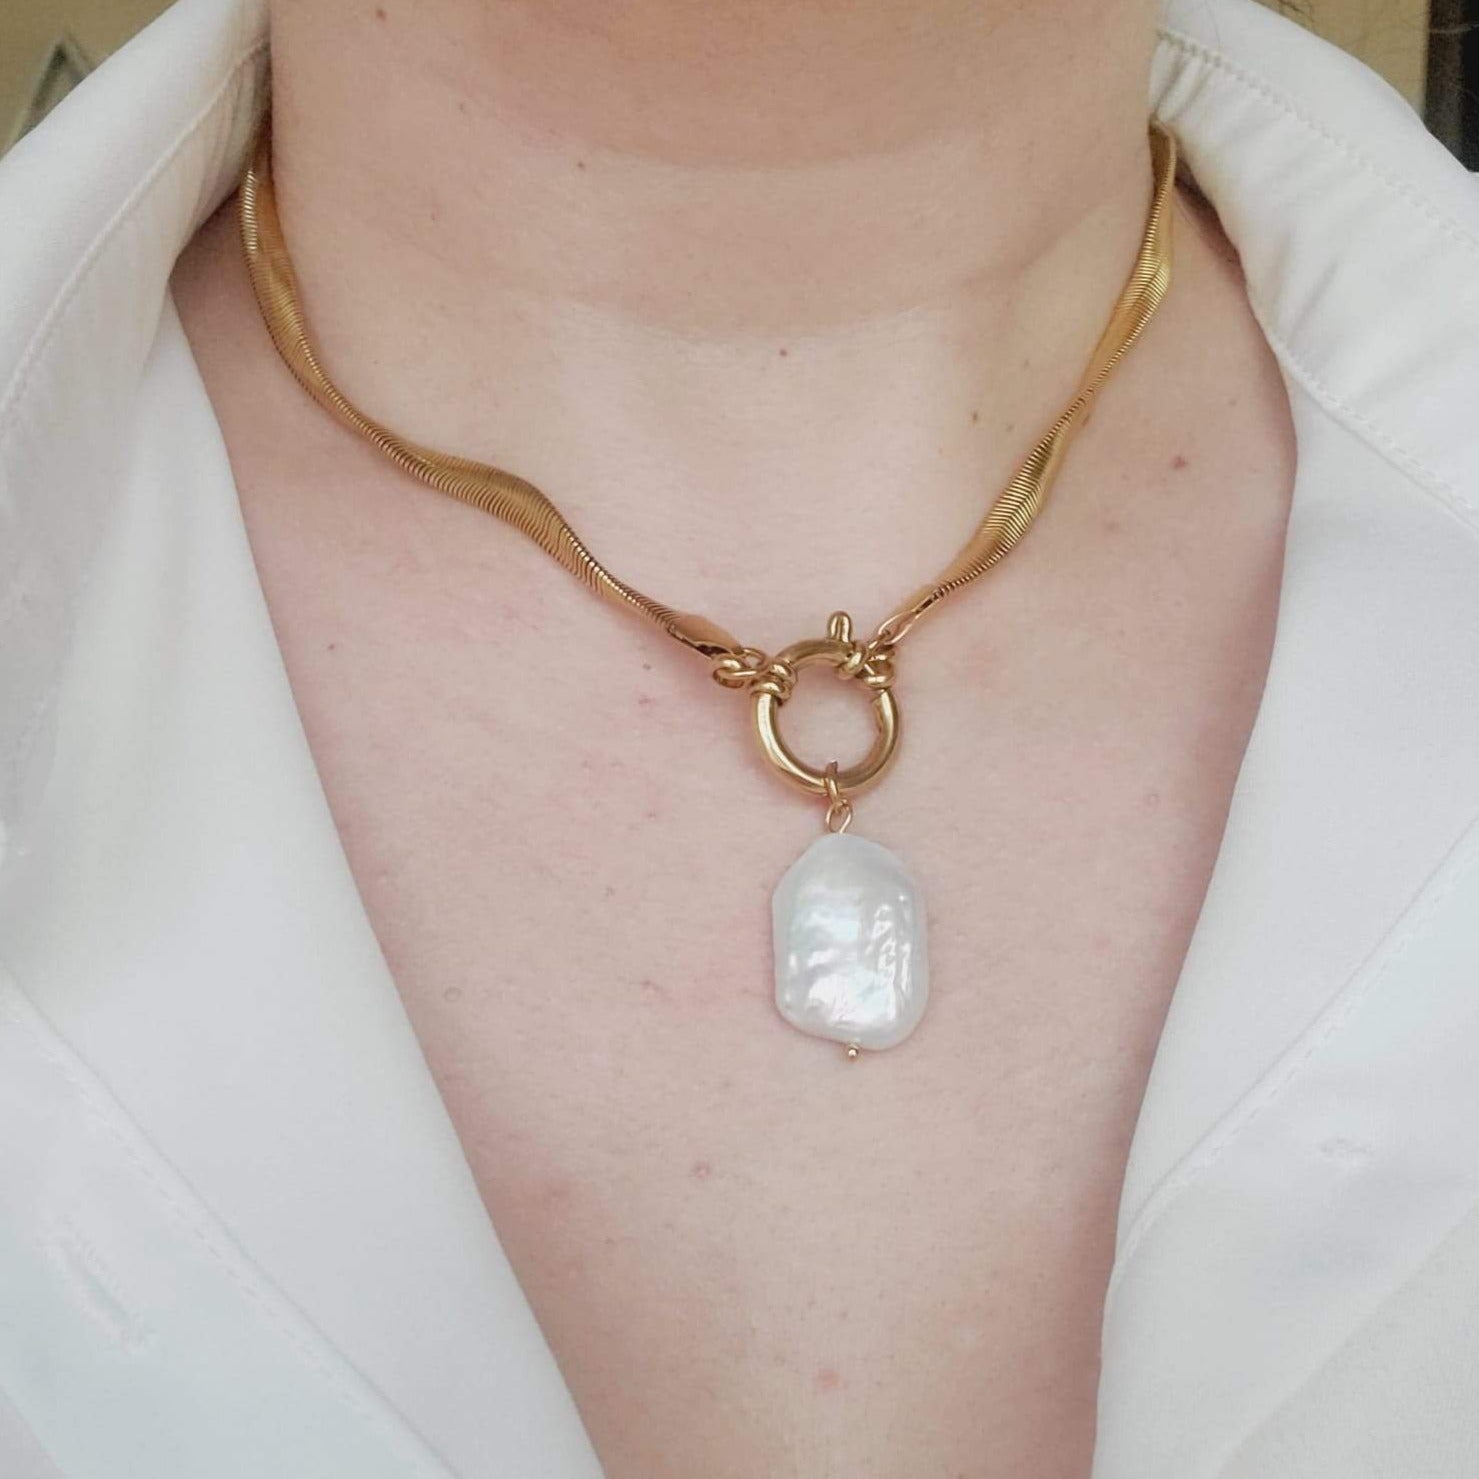 Minimalist chain, Gold filled Chain, Flat Gold Necklace, Snake Chain, Water resistant jewelry, water resistant Necklace, Water resistant bracelet, vintage jewelry, vintage jewelry, vintage necklace, 14k gold necklace, 14k gold jewelry, 14k gold necklace, fine jewelry, fine necklace, fine bracelet, snake gold necklace, bold necklace, bold jewelry, handmade jewelry, fine jewelry brand, baroque chain, baroque pearl necklace